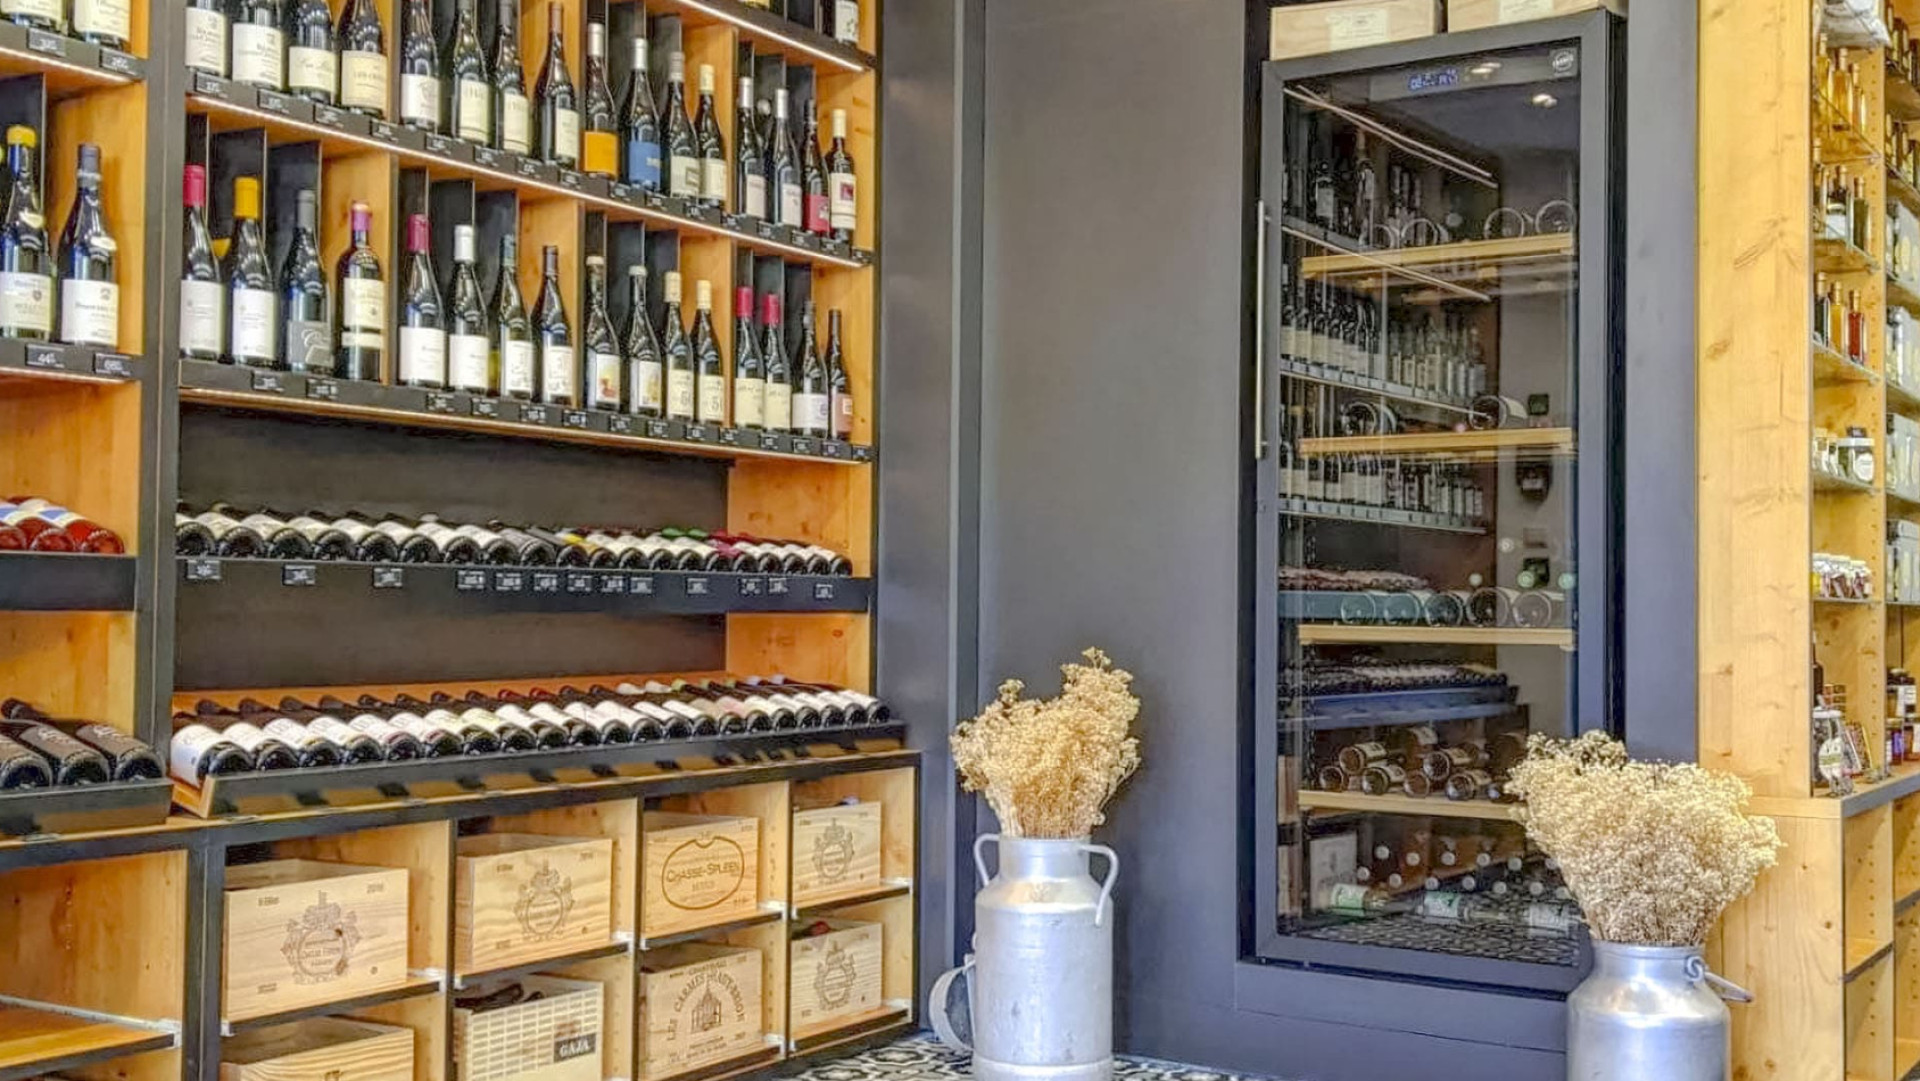 Installation of a wine cabinet in a professional premises, a cheese dairy and wine shop in Annecy for successful wine and cheese pairings.